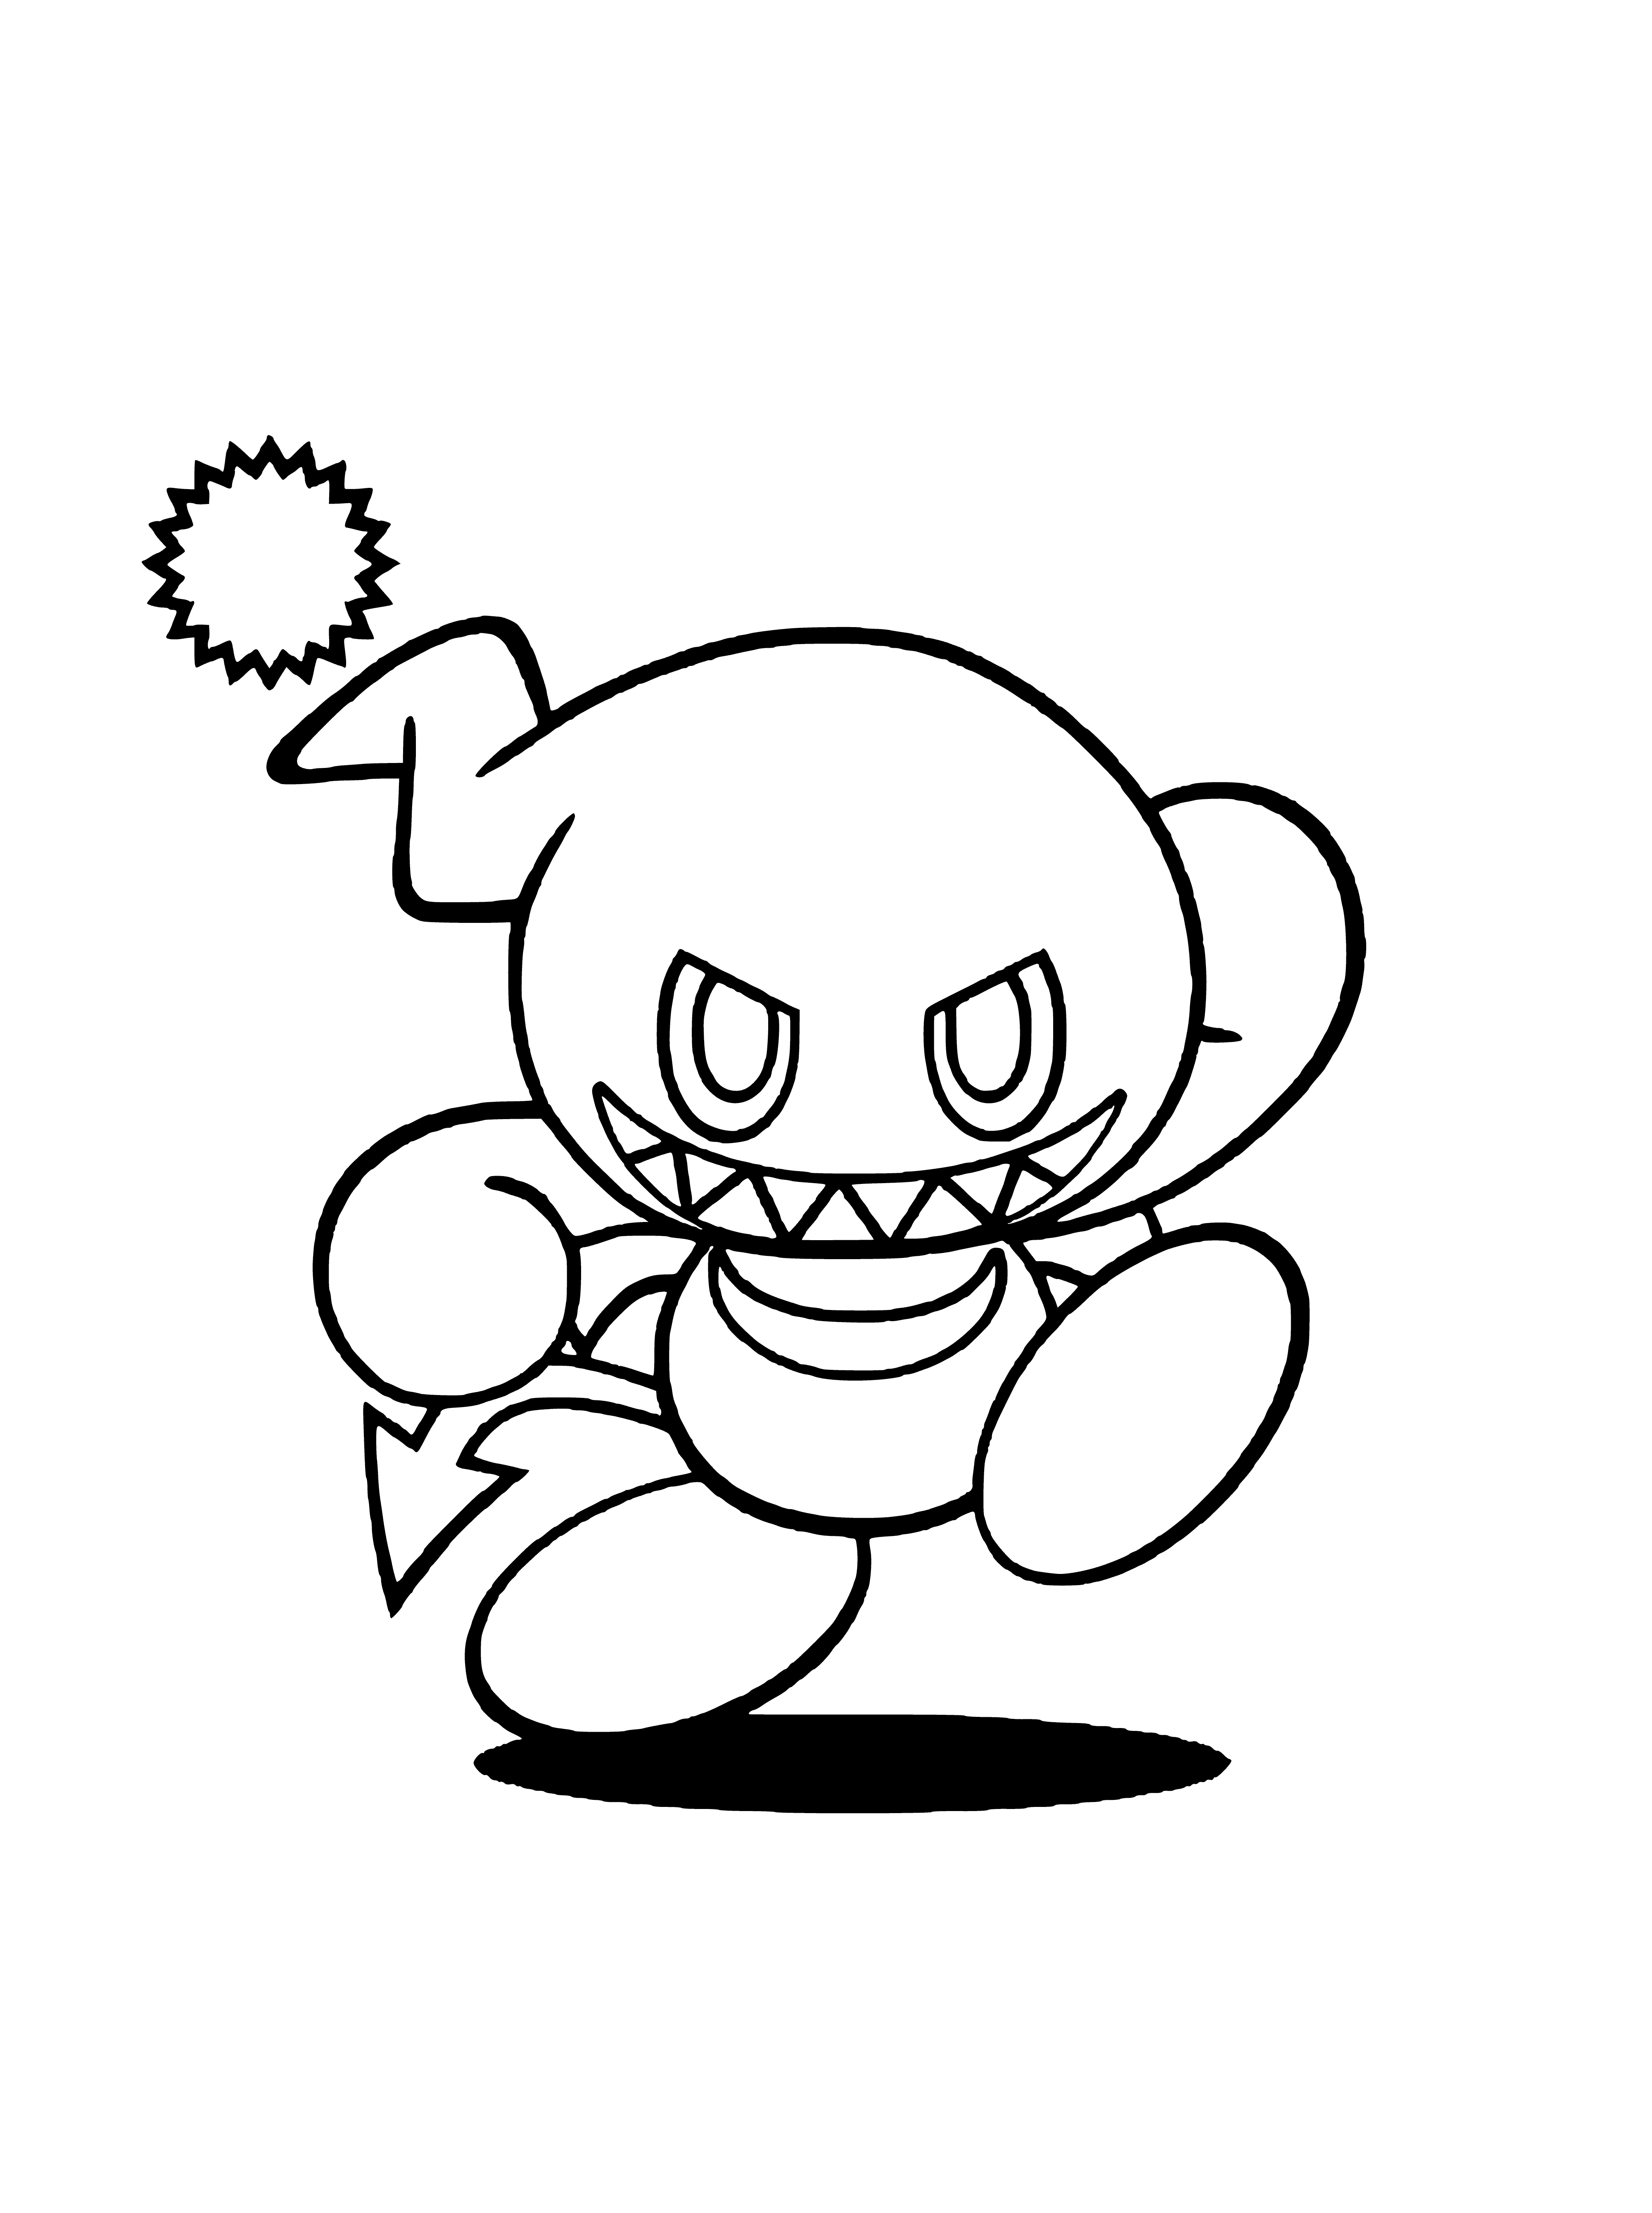 Evil Chao coloring page